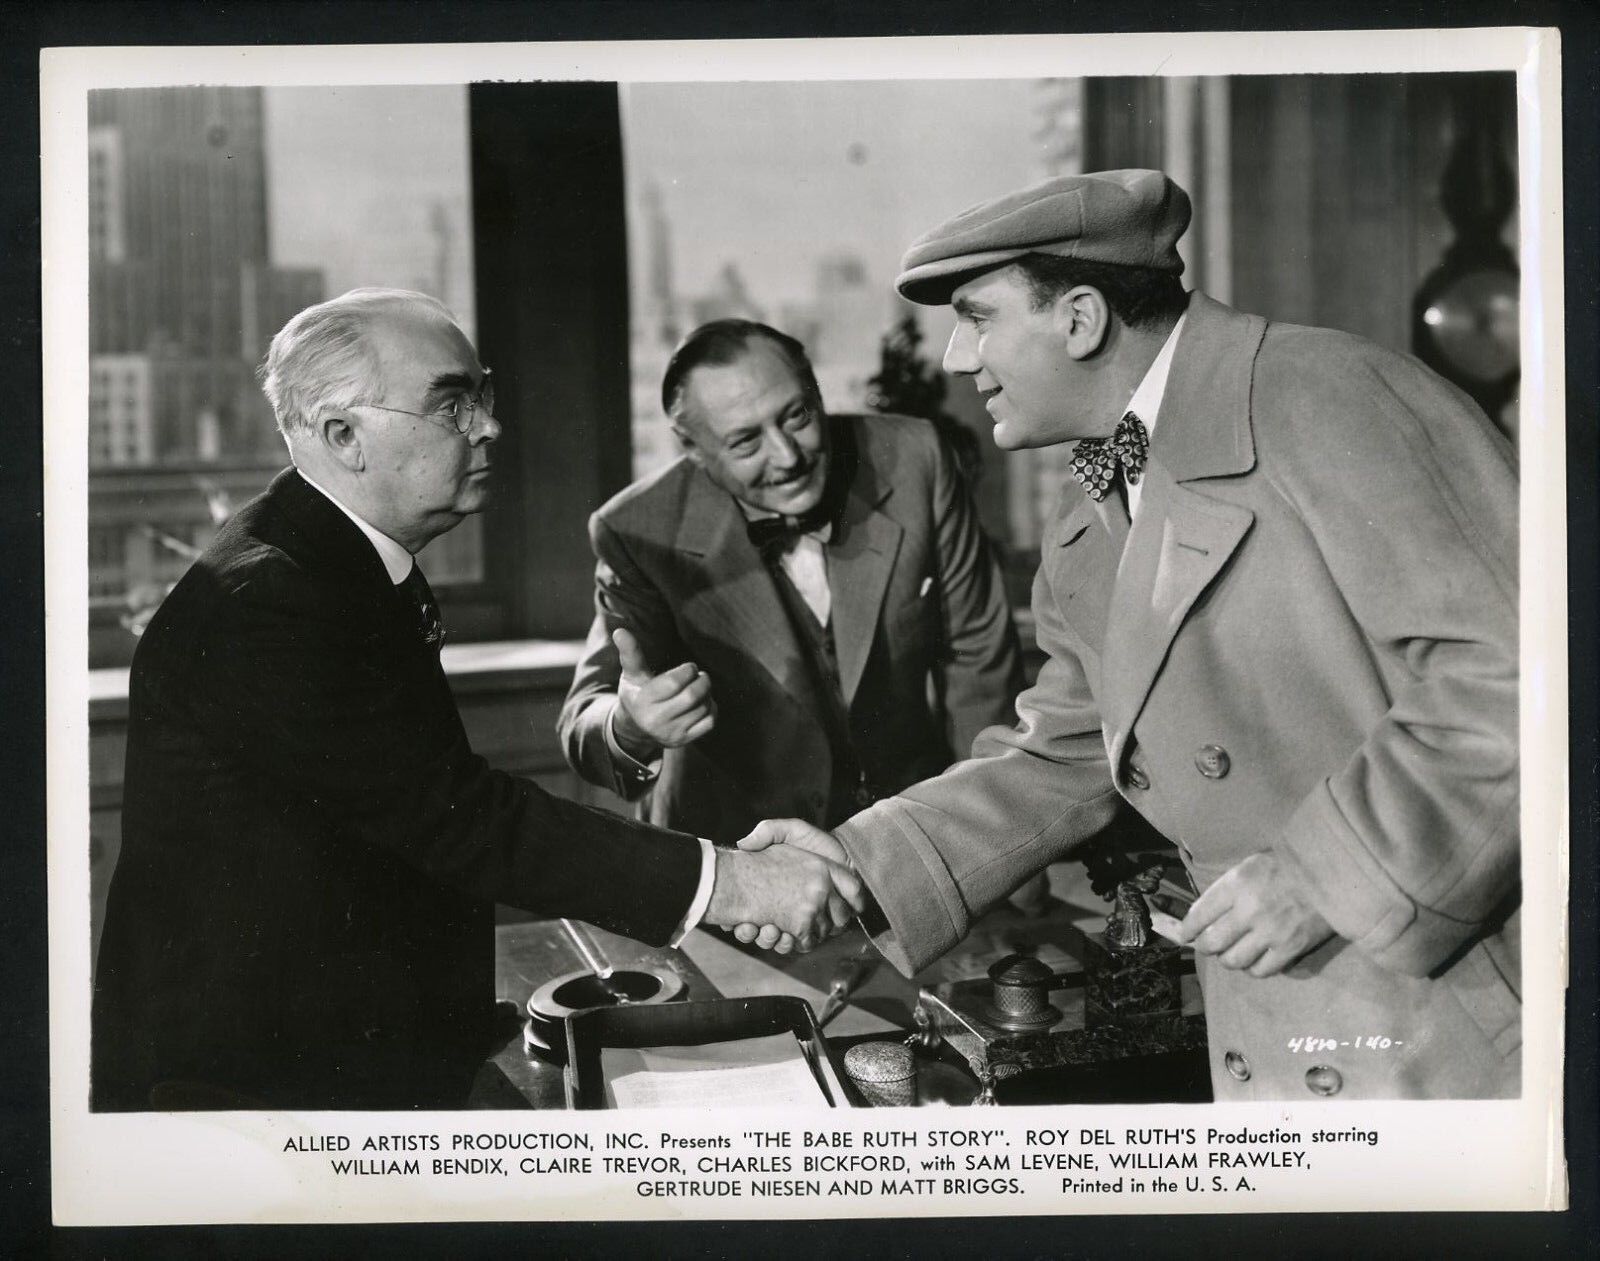 William Bendix in Babe Ruth Story Movie Press Photo Poster painting Yankees